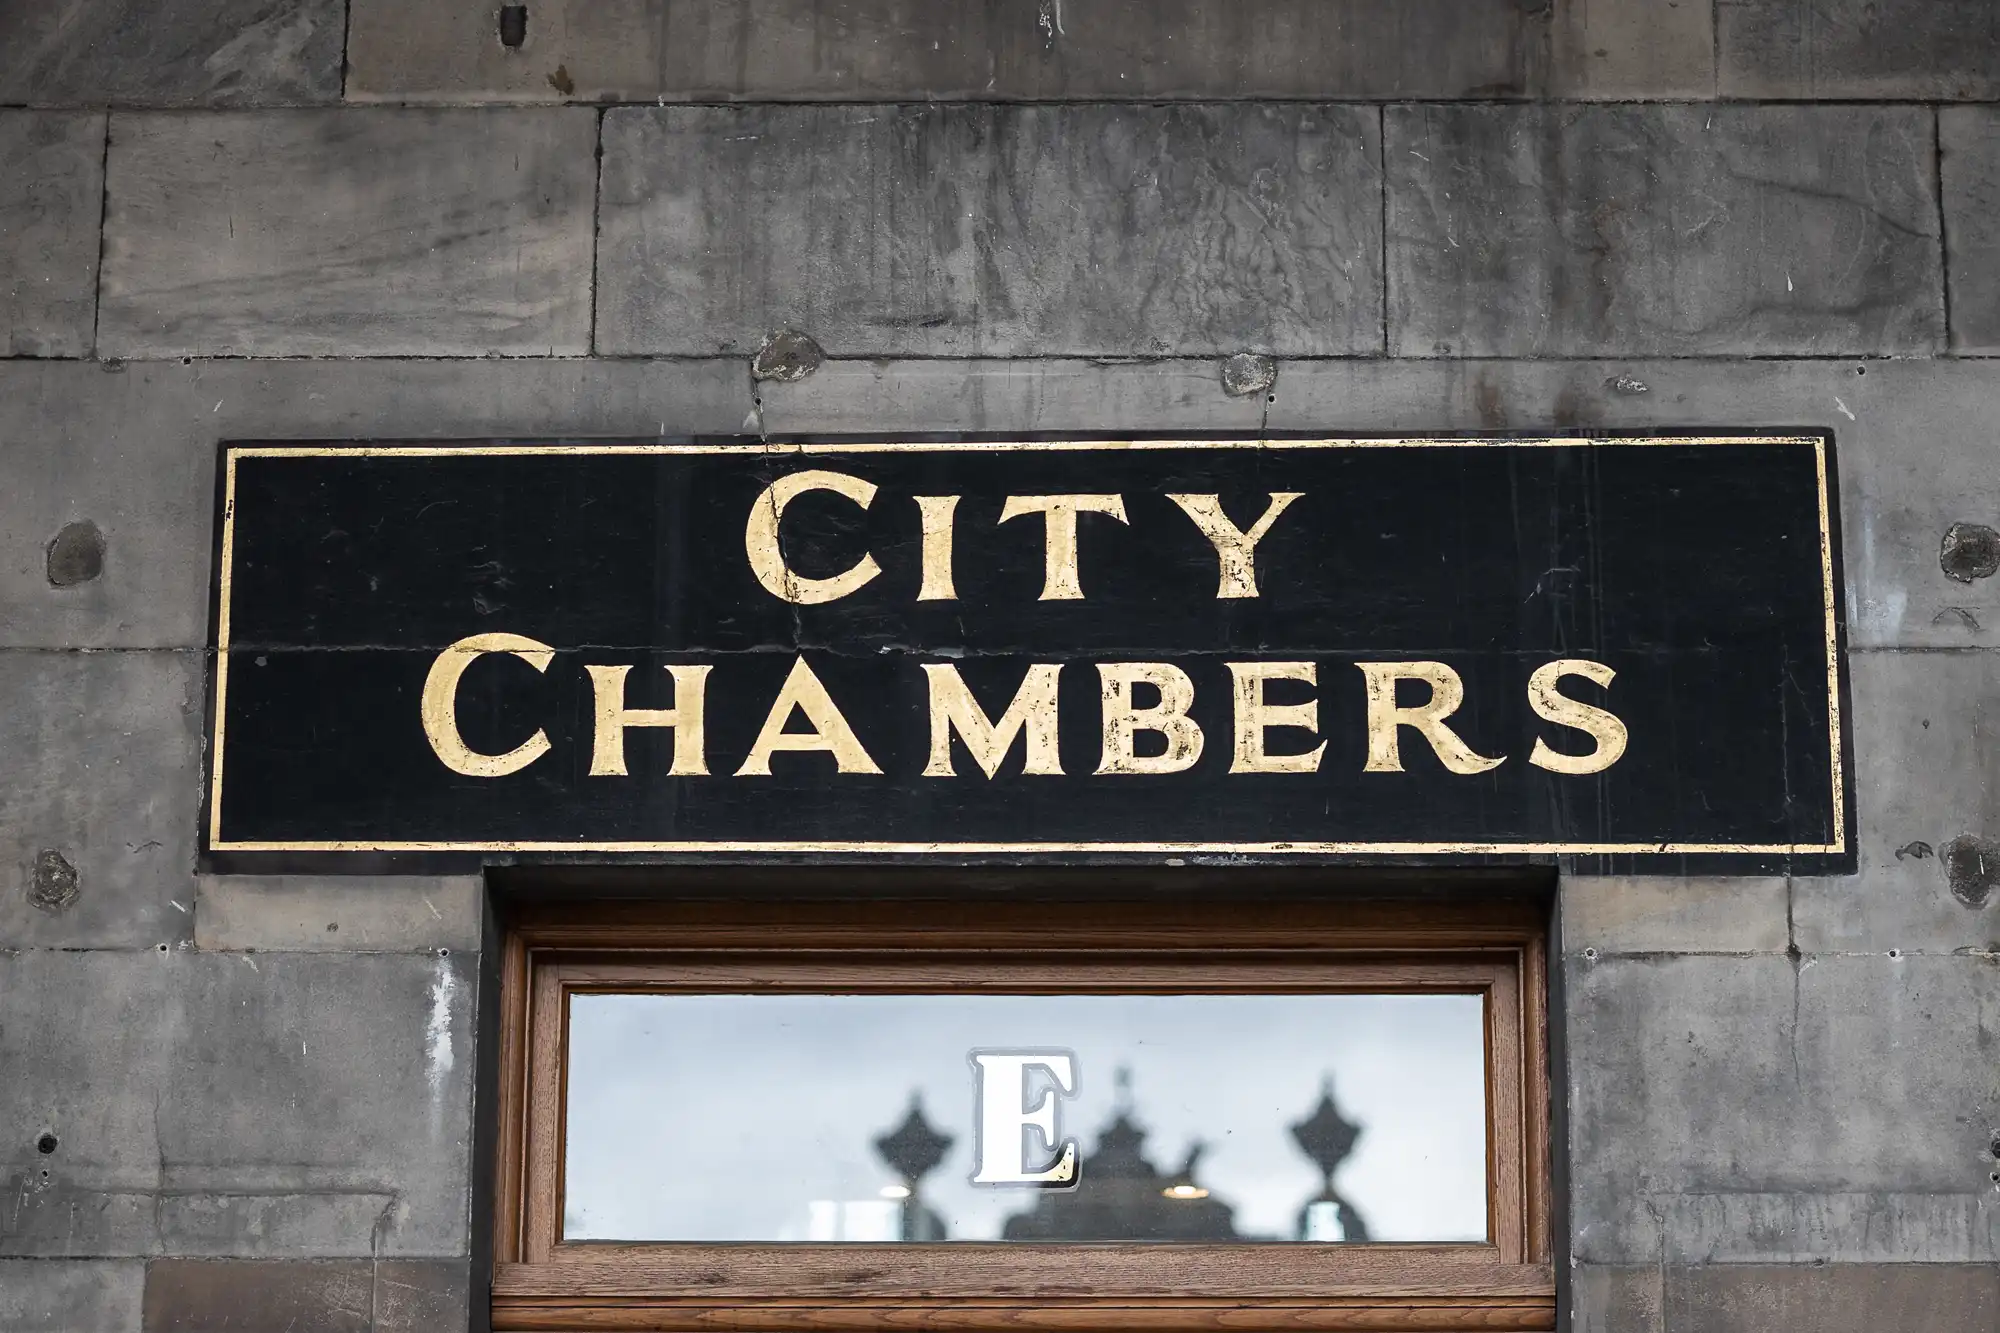 A black sign with gold letters reading "CITY CHAMBERS" is mounted on a stone wall above a window.